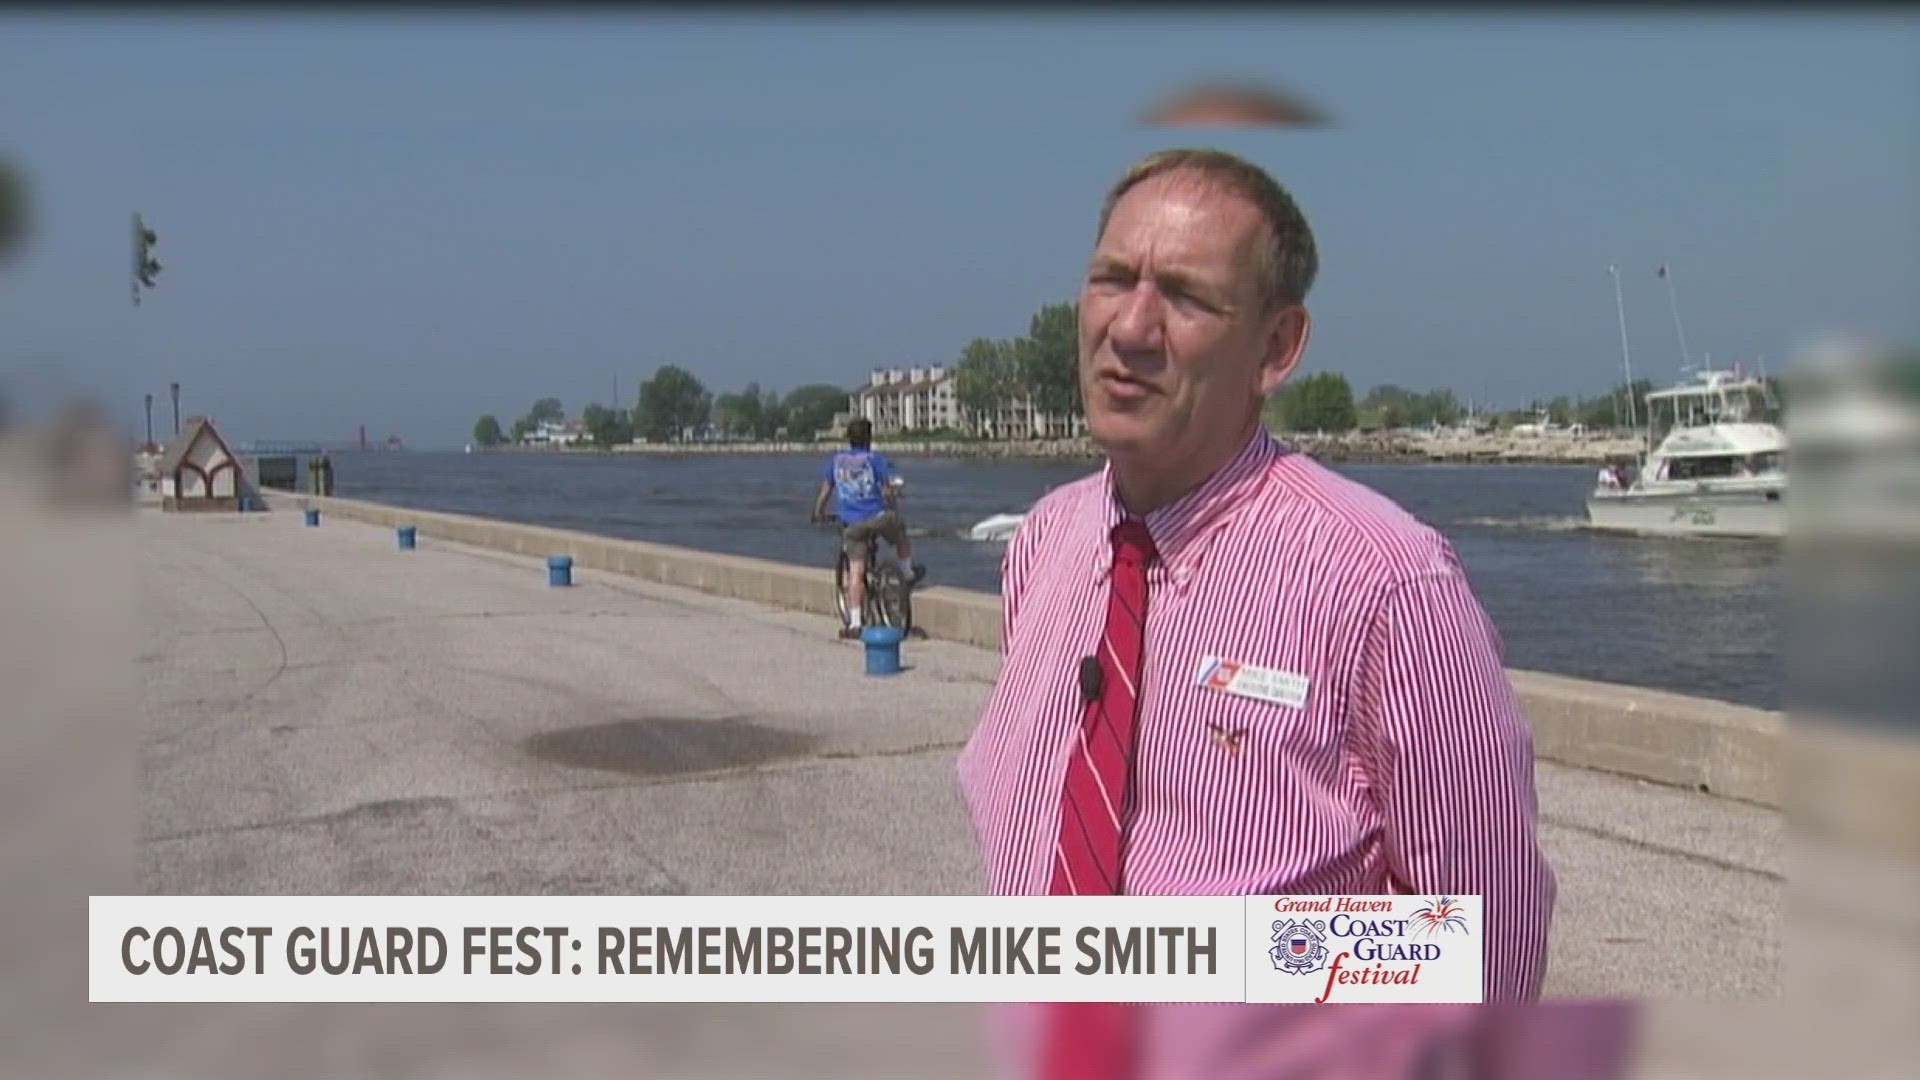 For directing the Coast Guard Festival for 17 years before retiring, Smith is receiving full military honors.